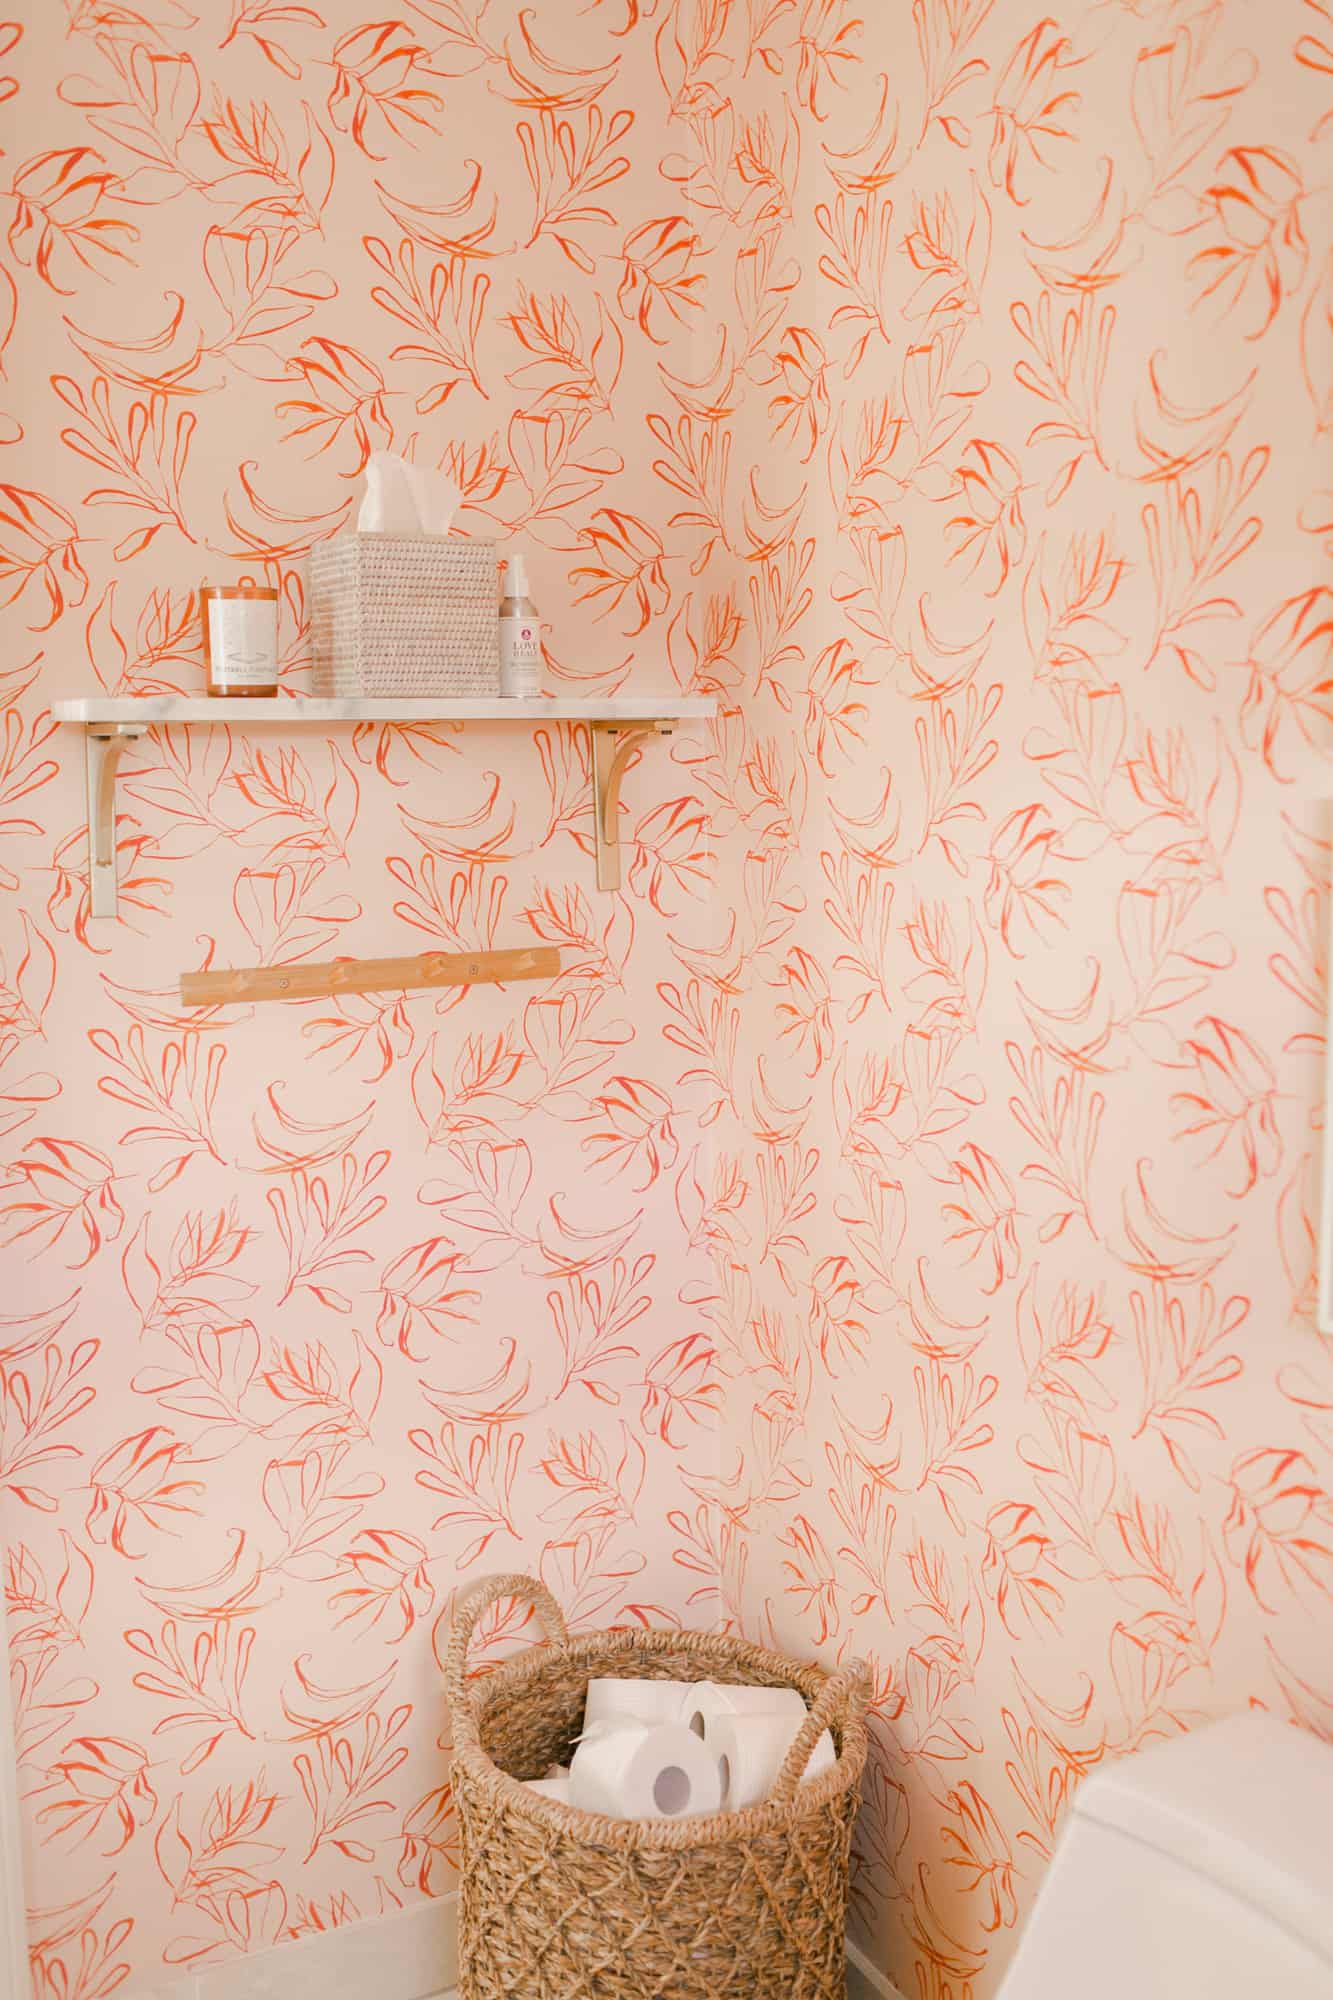 pink with flower wallpaper in a bathroom with basket of toilet paper on the floor and a white shelf with a candle and tissues on it